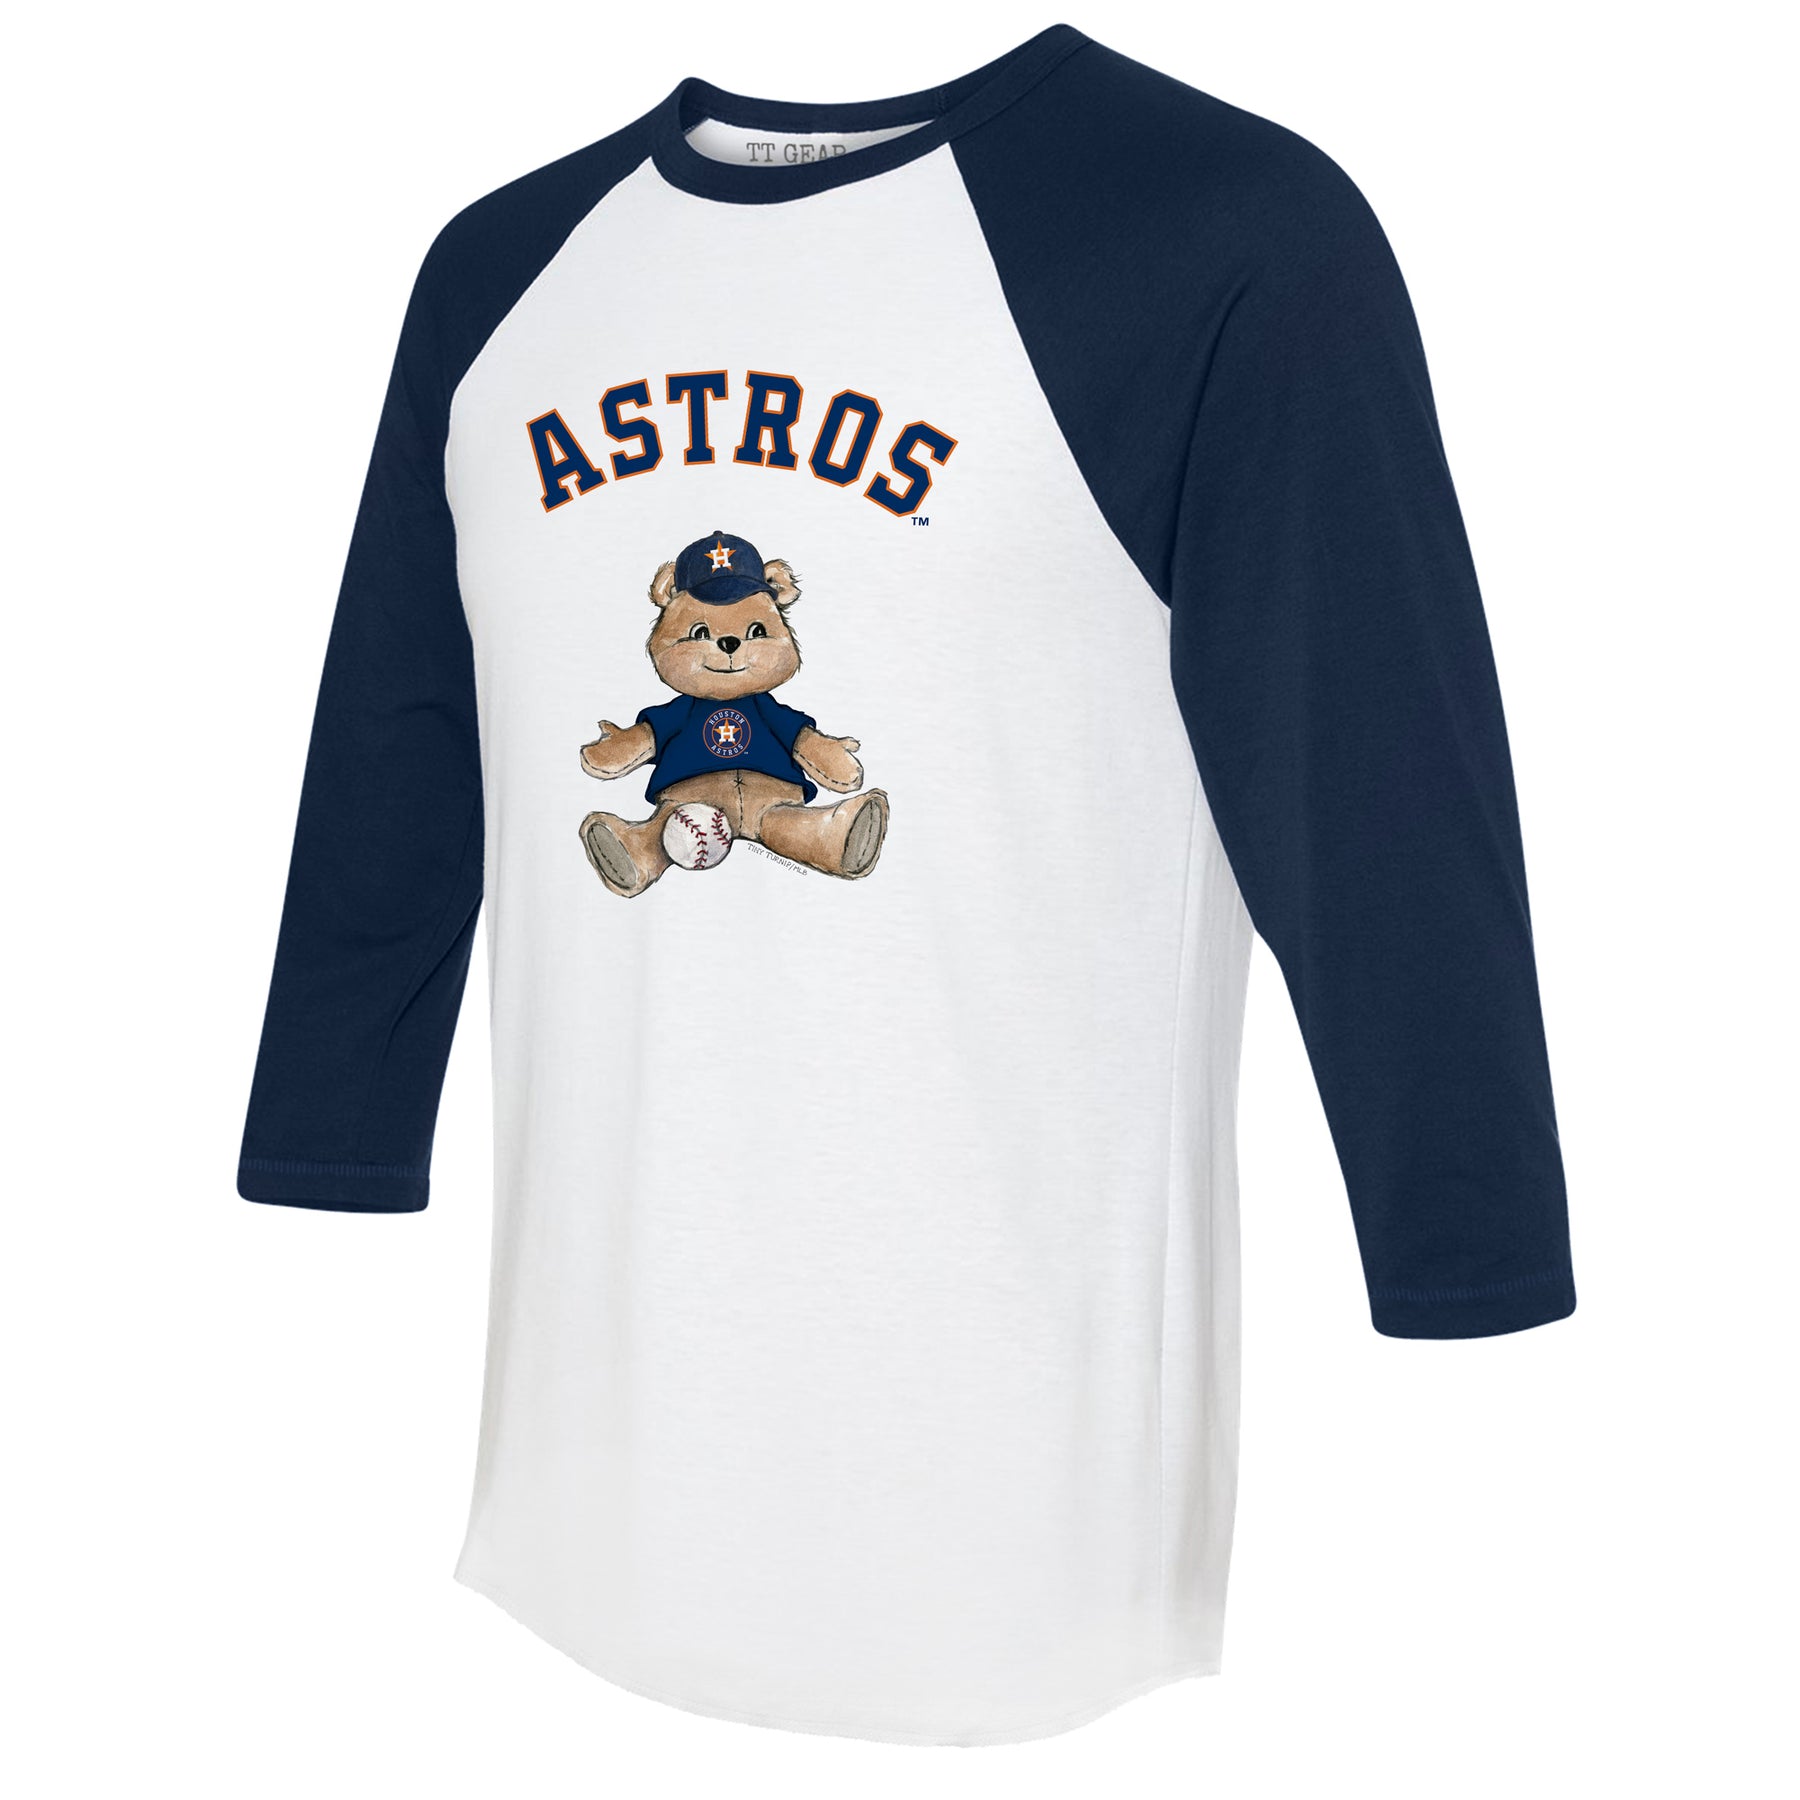 Houston Astros Jersey Shirt Adult XS/Small, Youth Large Unisex